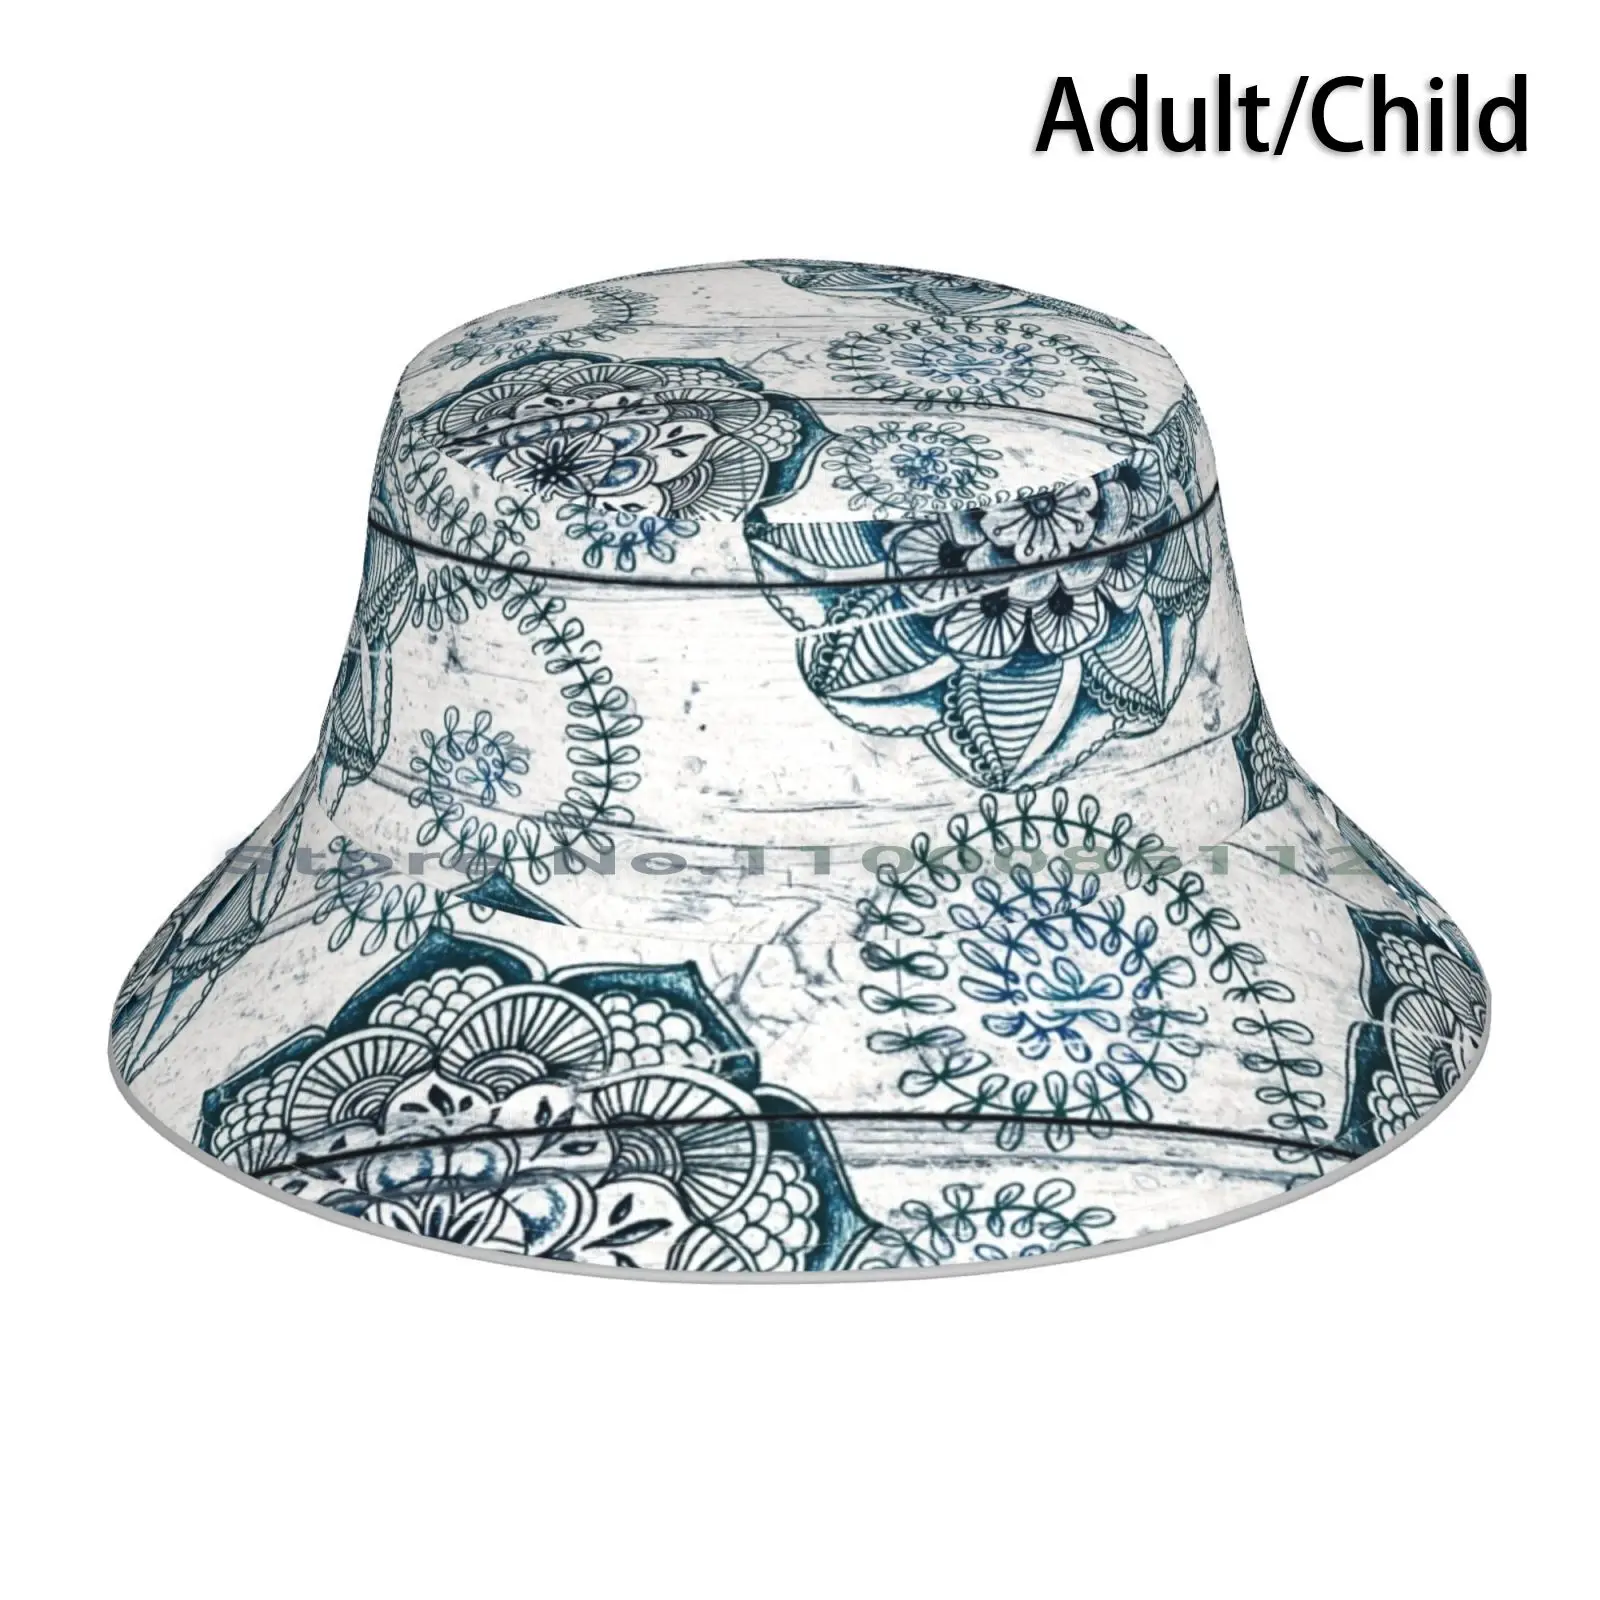 

Shabby Chic Navy Blue Doodles On Wood Bucket Hat Sun Cap Micklyn Shabby Chic Wooden Textured Textures Patterns Hand Drawn